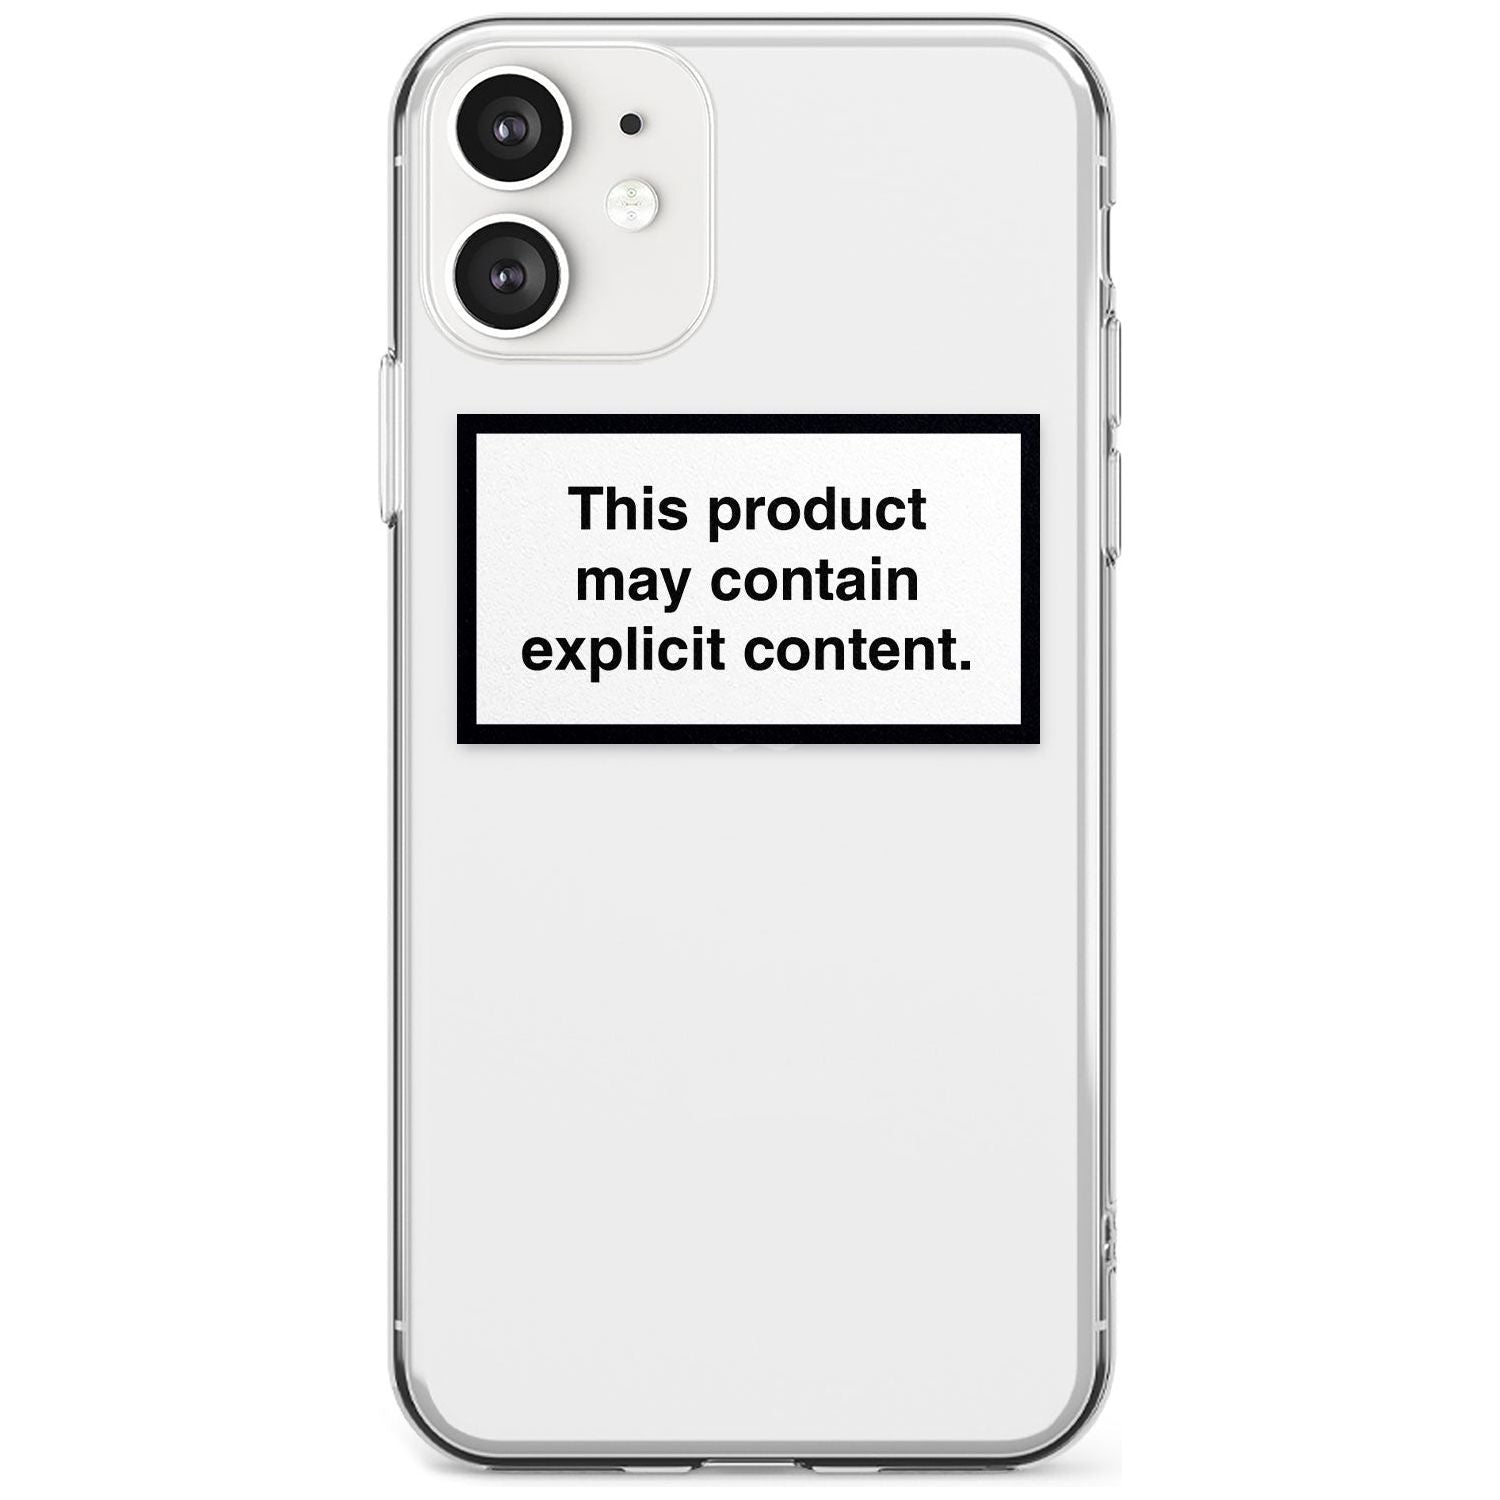 This product may contain explicit content Black Impact Phone Case for iPhone 11